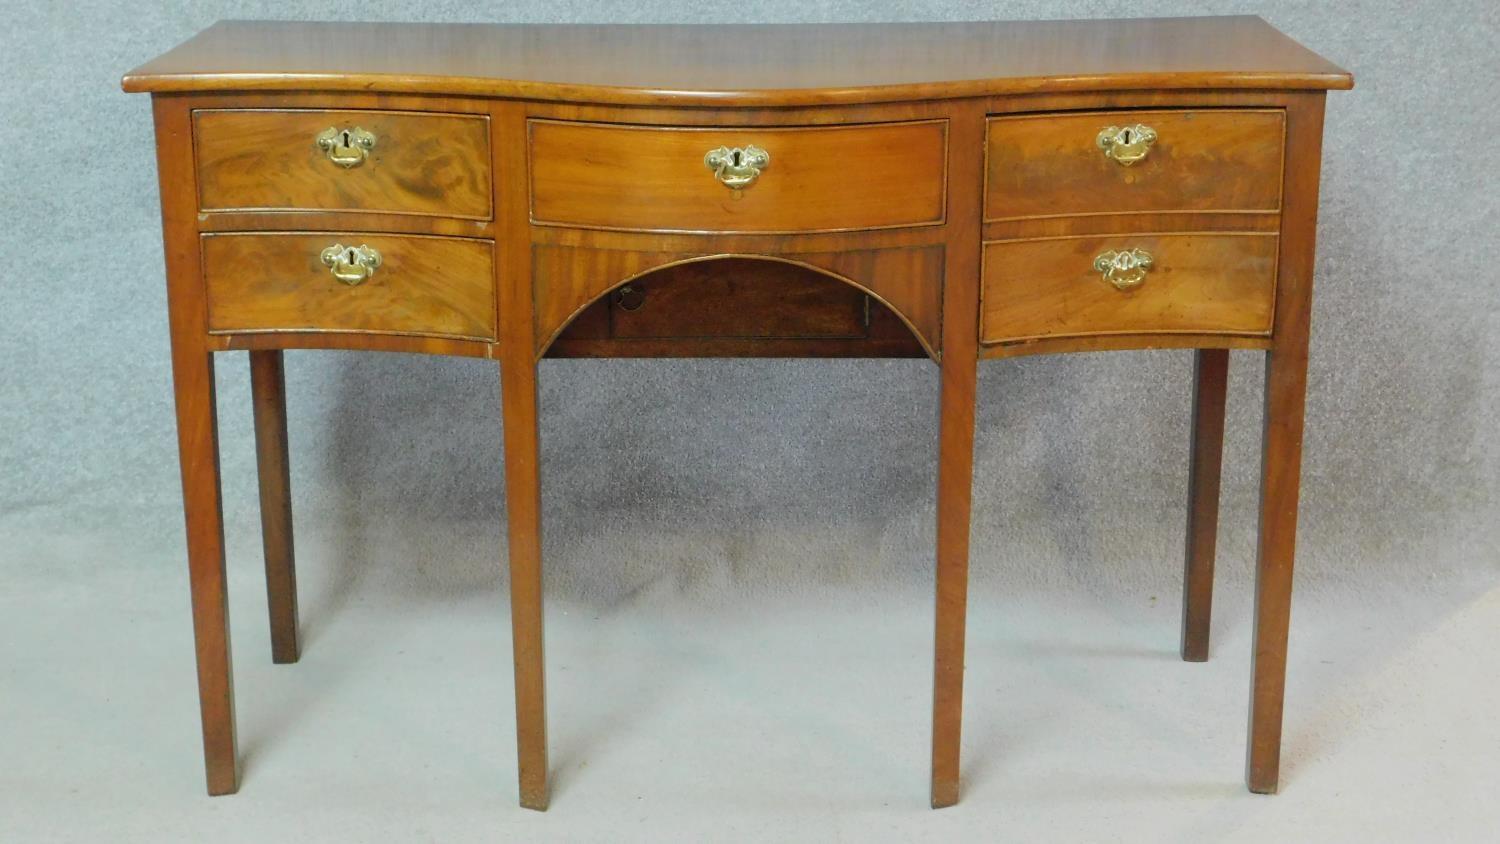 A small Regency mahogany serpentine fronted sideboard with an arrangement of five drawers and fitted